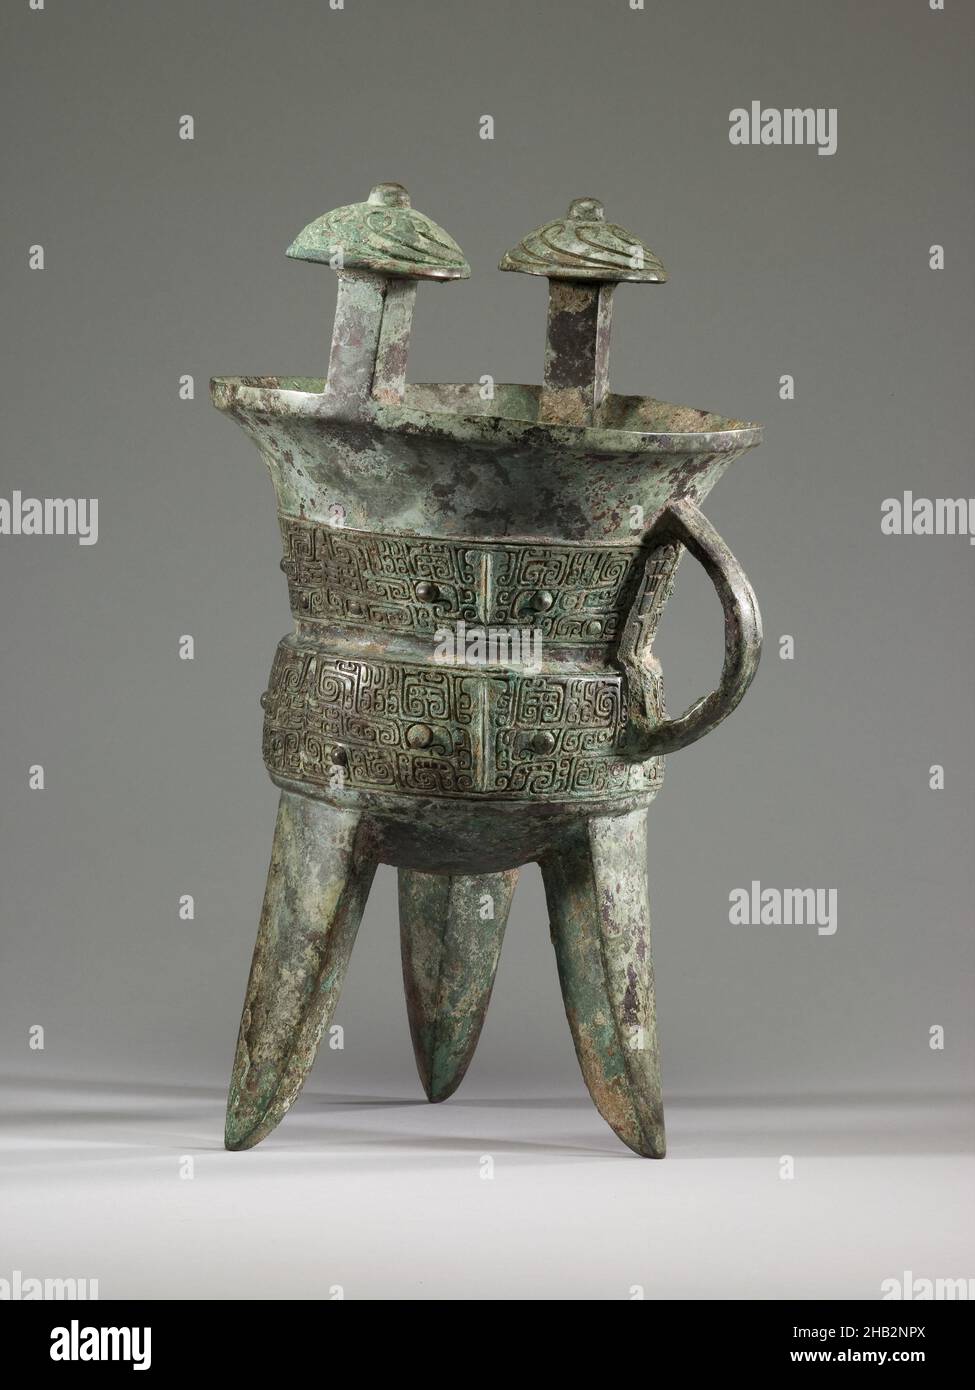 Tripod Wine Vessel (jia) with Design of Zoomorphic Masks, Chinese, Shang dynasty, 1600–1050 BC, 13th century BC, Bronze, China, Asia, Containers, metalwork, height: 13 1/2 in. (34.3 cm Stock Photo